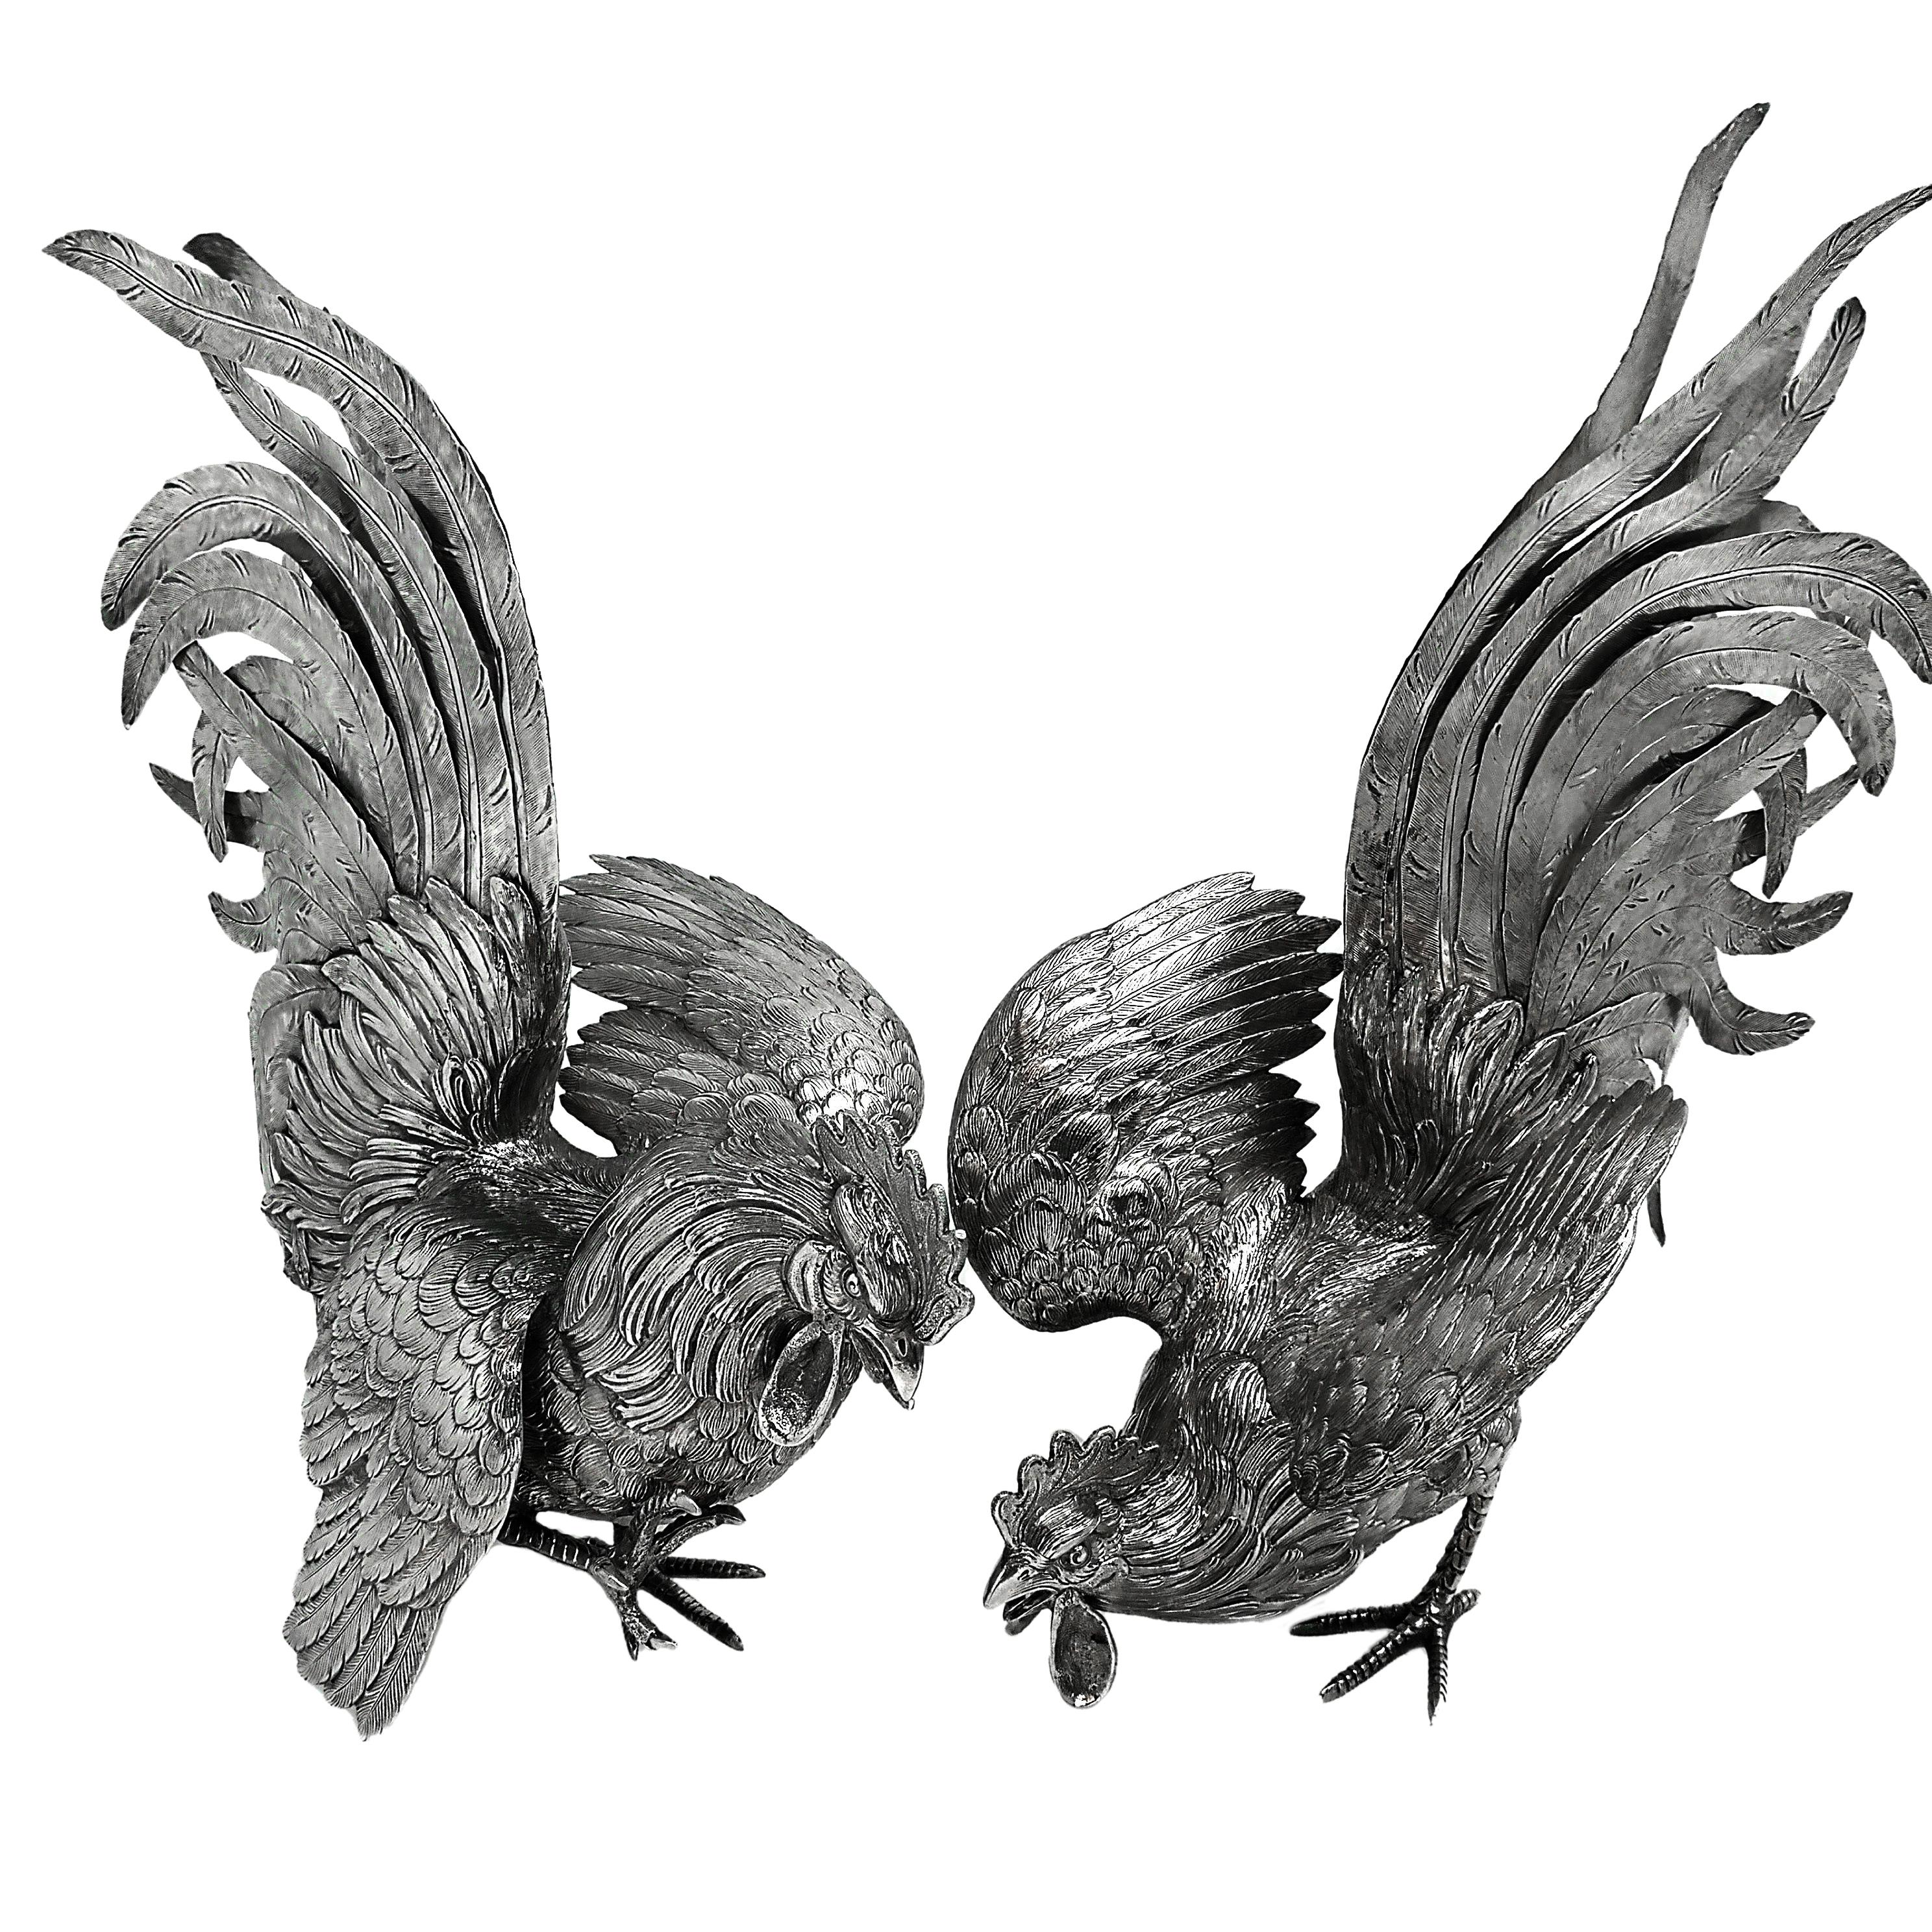 Pair Antique Solid Silver Cockerels / Roosters in an attitude of fighting. These Fighting Cockerels are created with a wonderful attention to detail with close attention paid to the feathers and plumage. Both Roosters have magnificent spread tail